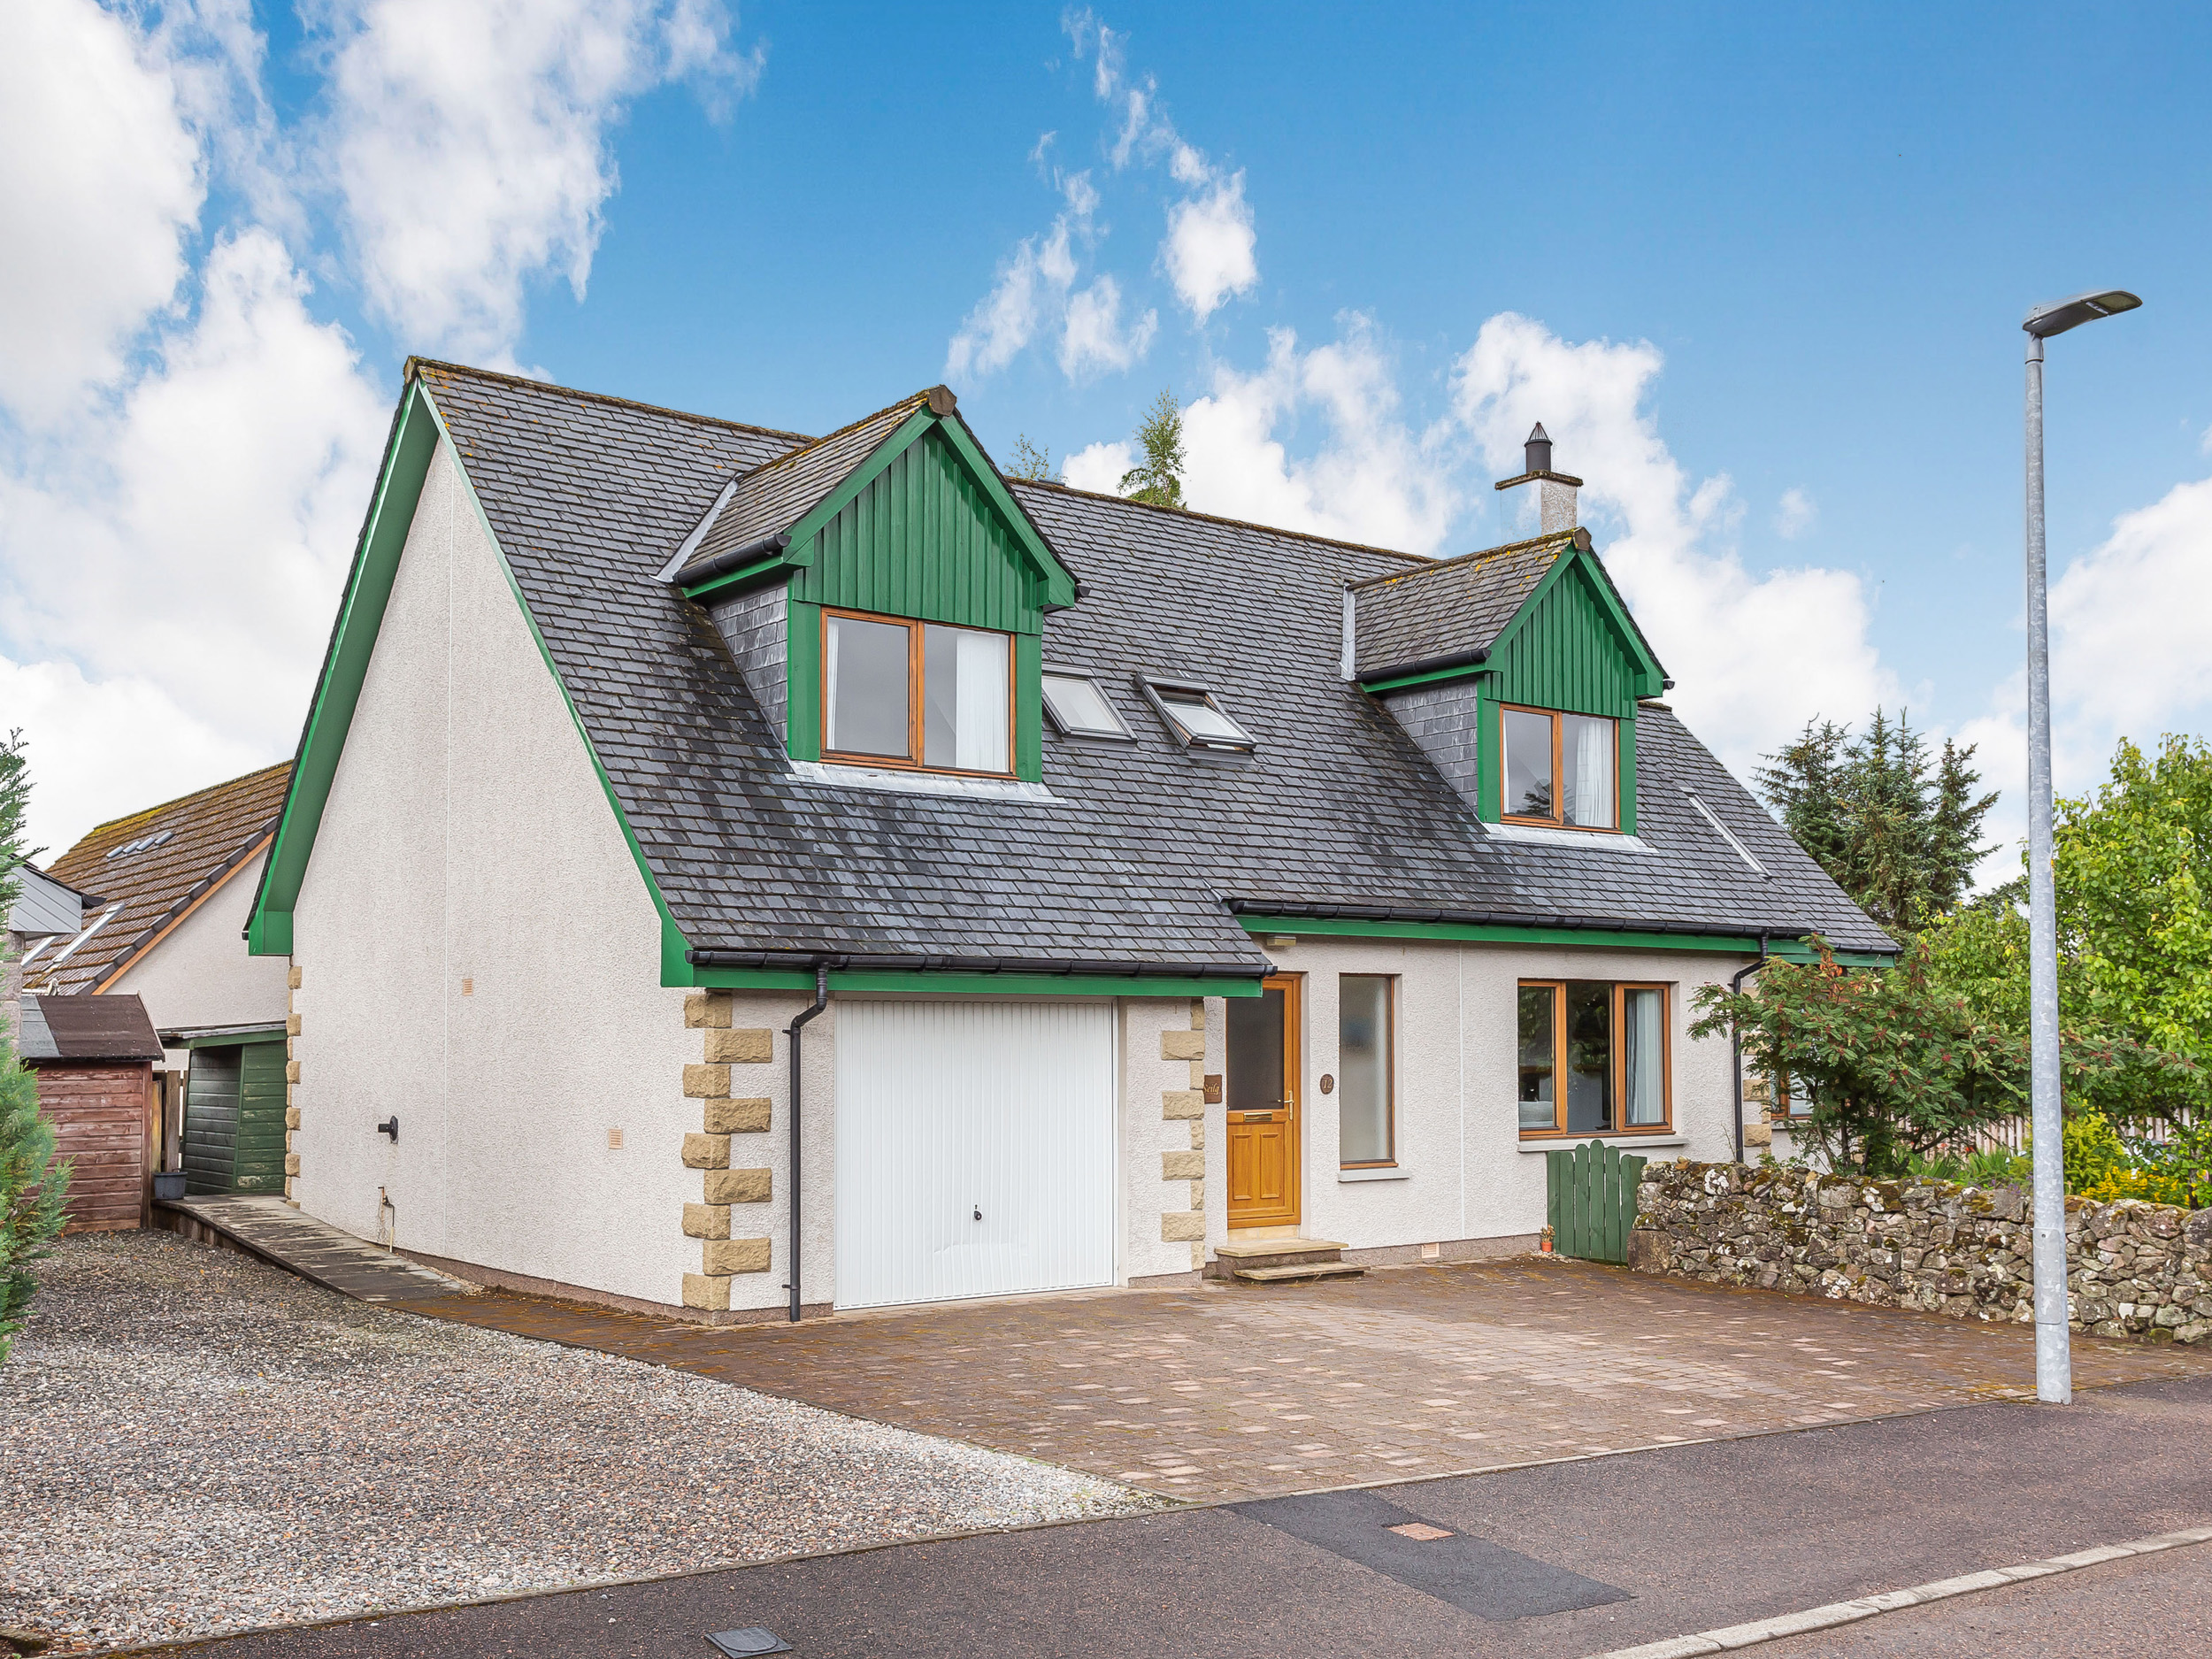 4 bedroom Cottage for rent in Newtonmore